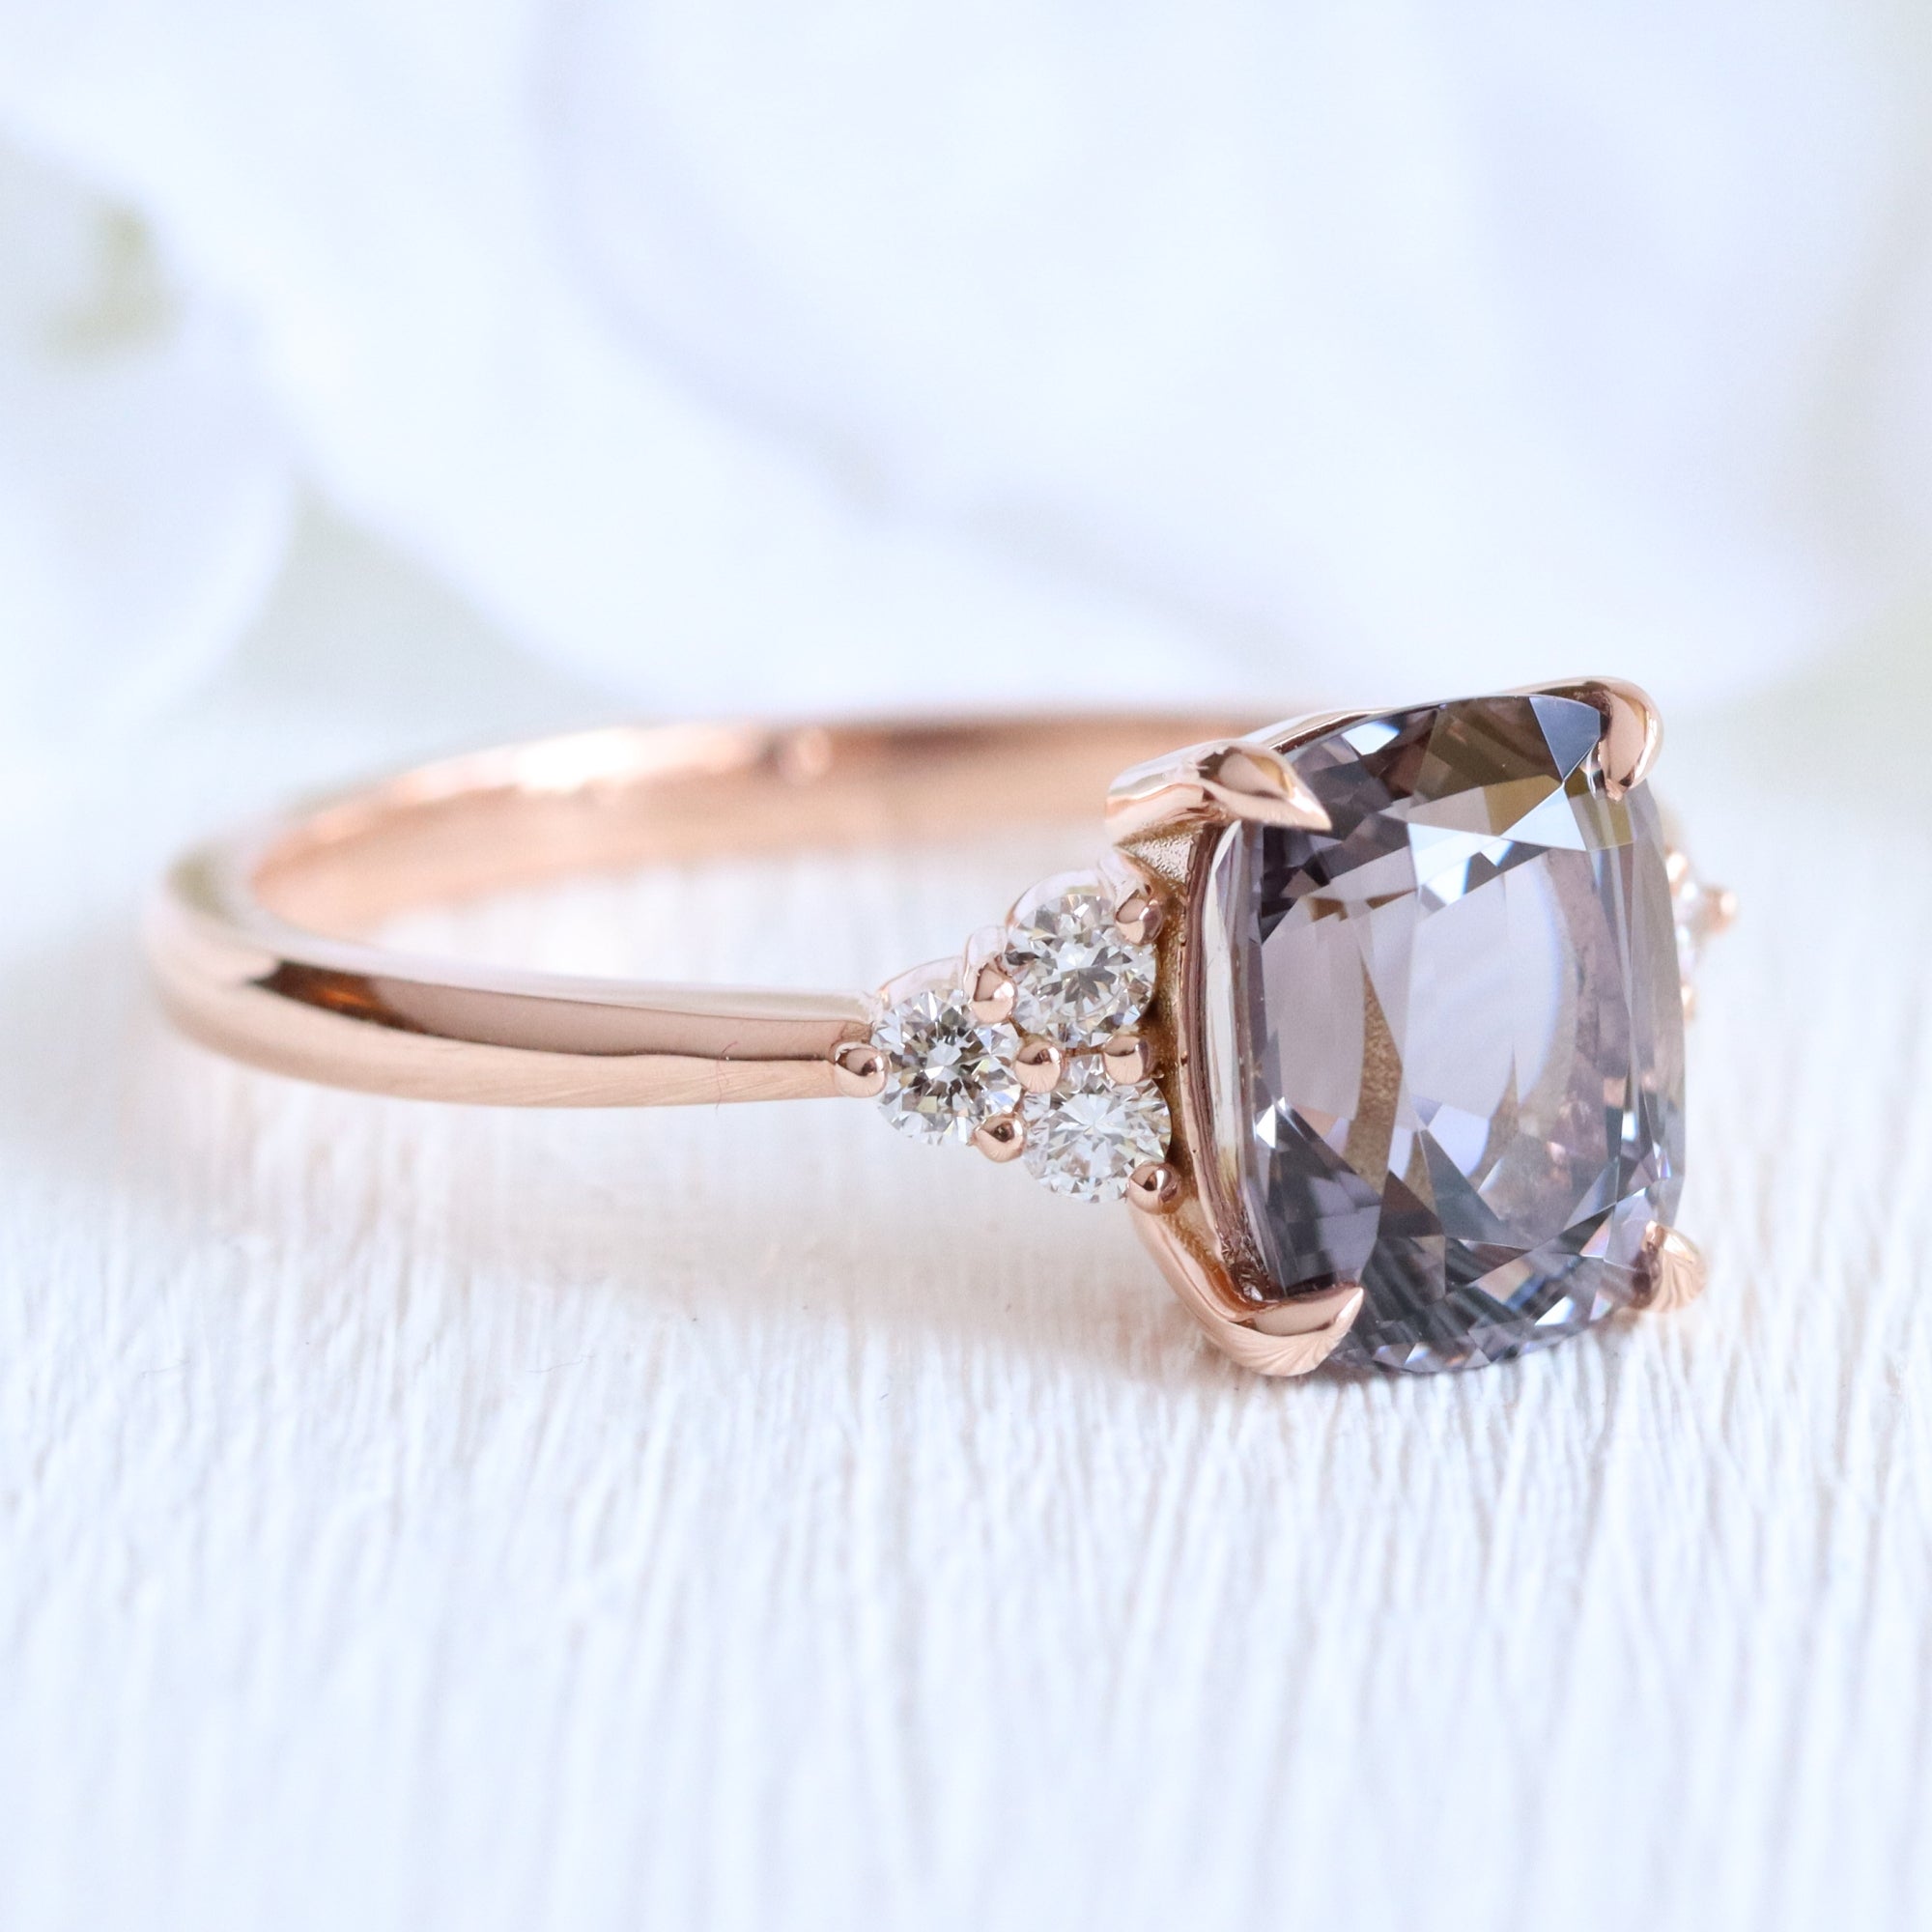 Cushion grey spinel diamond ring rose gold 3 stone engagement ring la more design jewelry